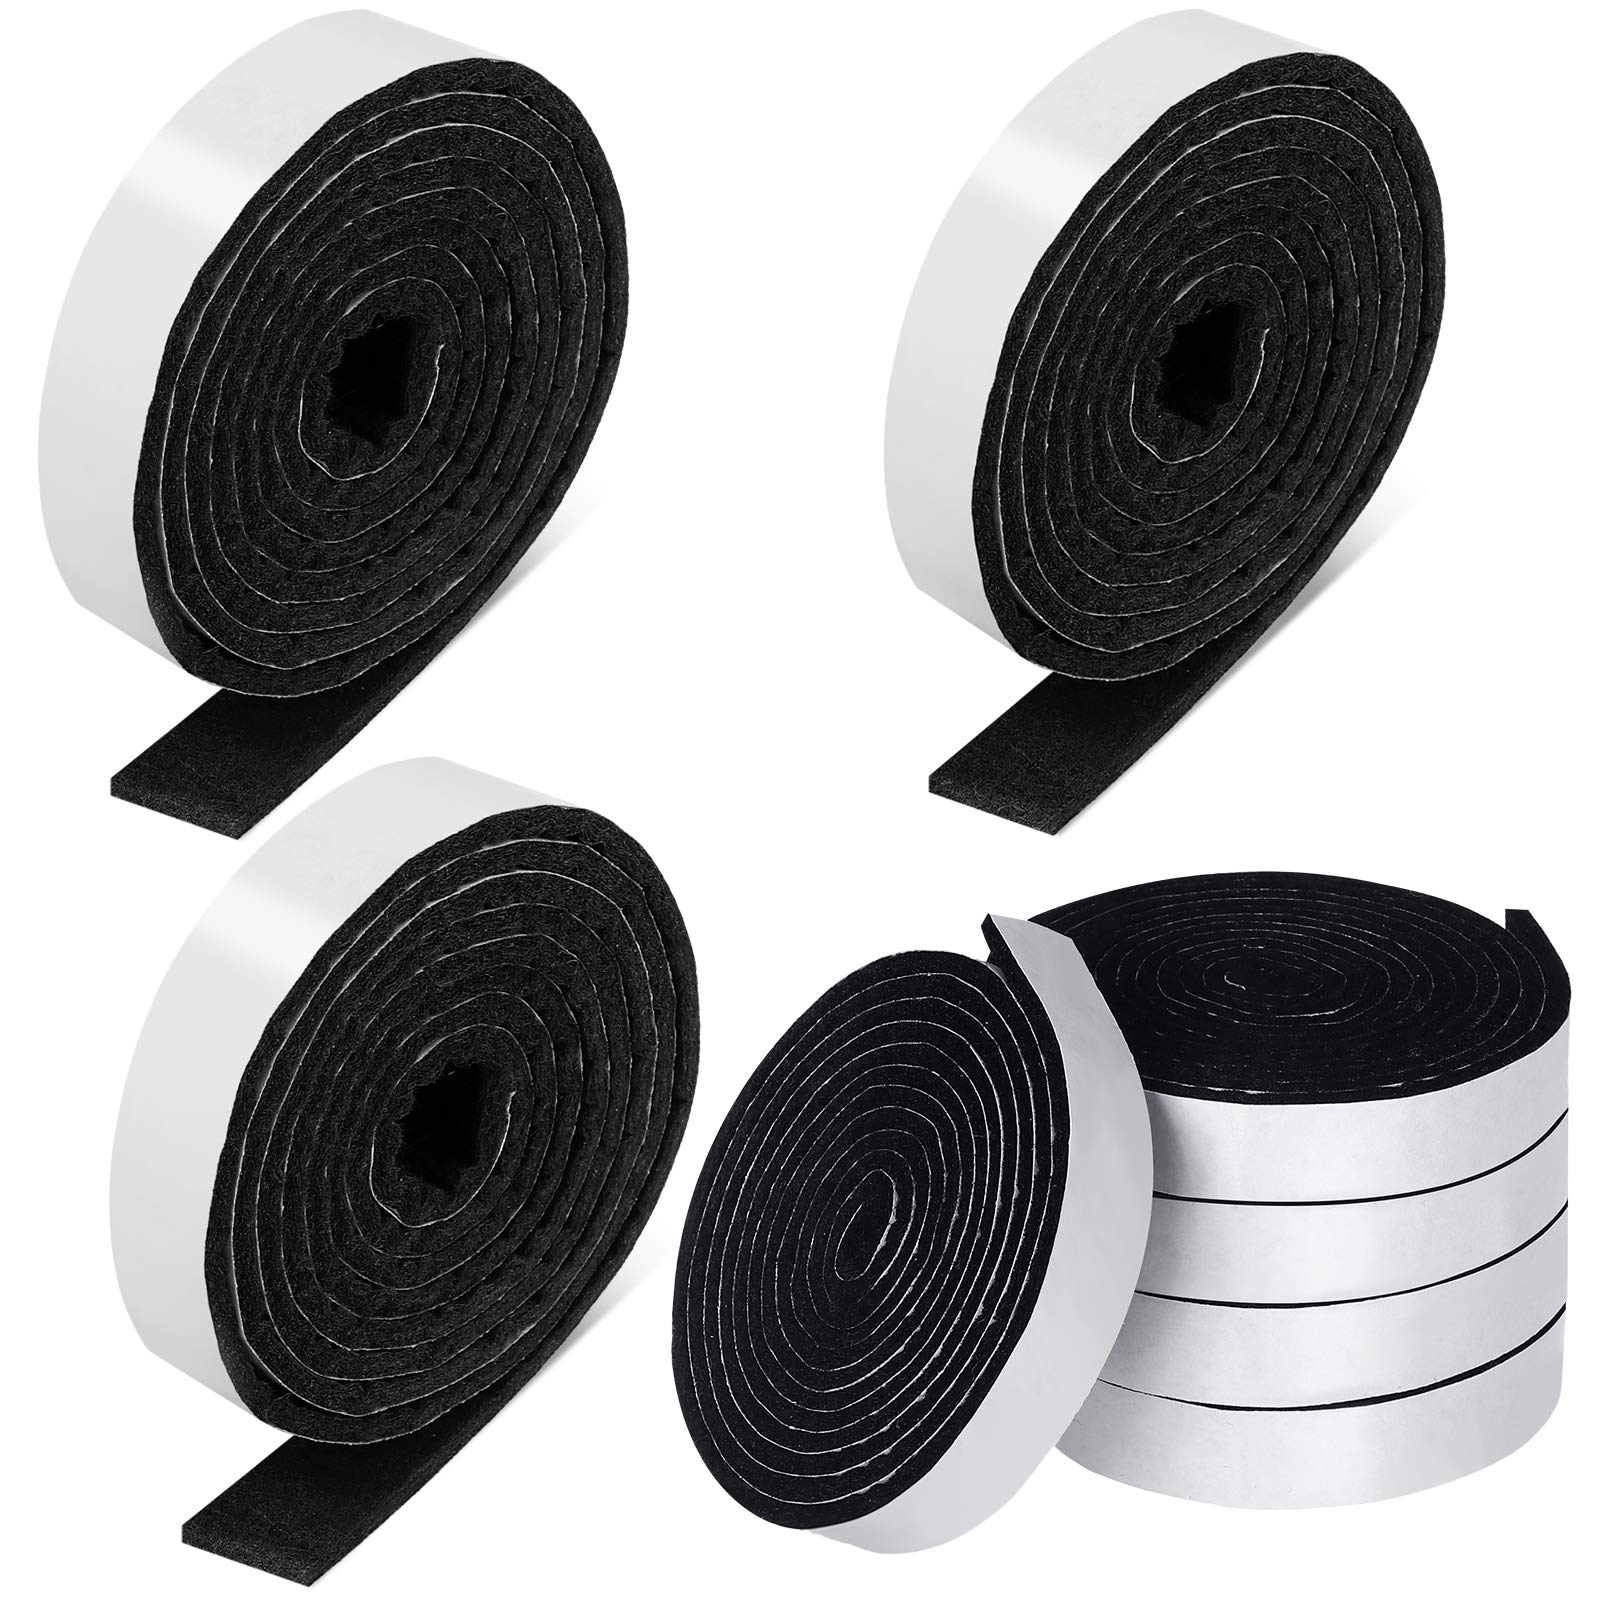 Zonon 1/2 x 60 Inch Felt Strips with Adhesive Backing Felt Tapes Felt Strip Rolls Furniture Self-Stick Heavy Duty Polyester for Protec